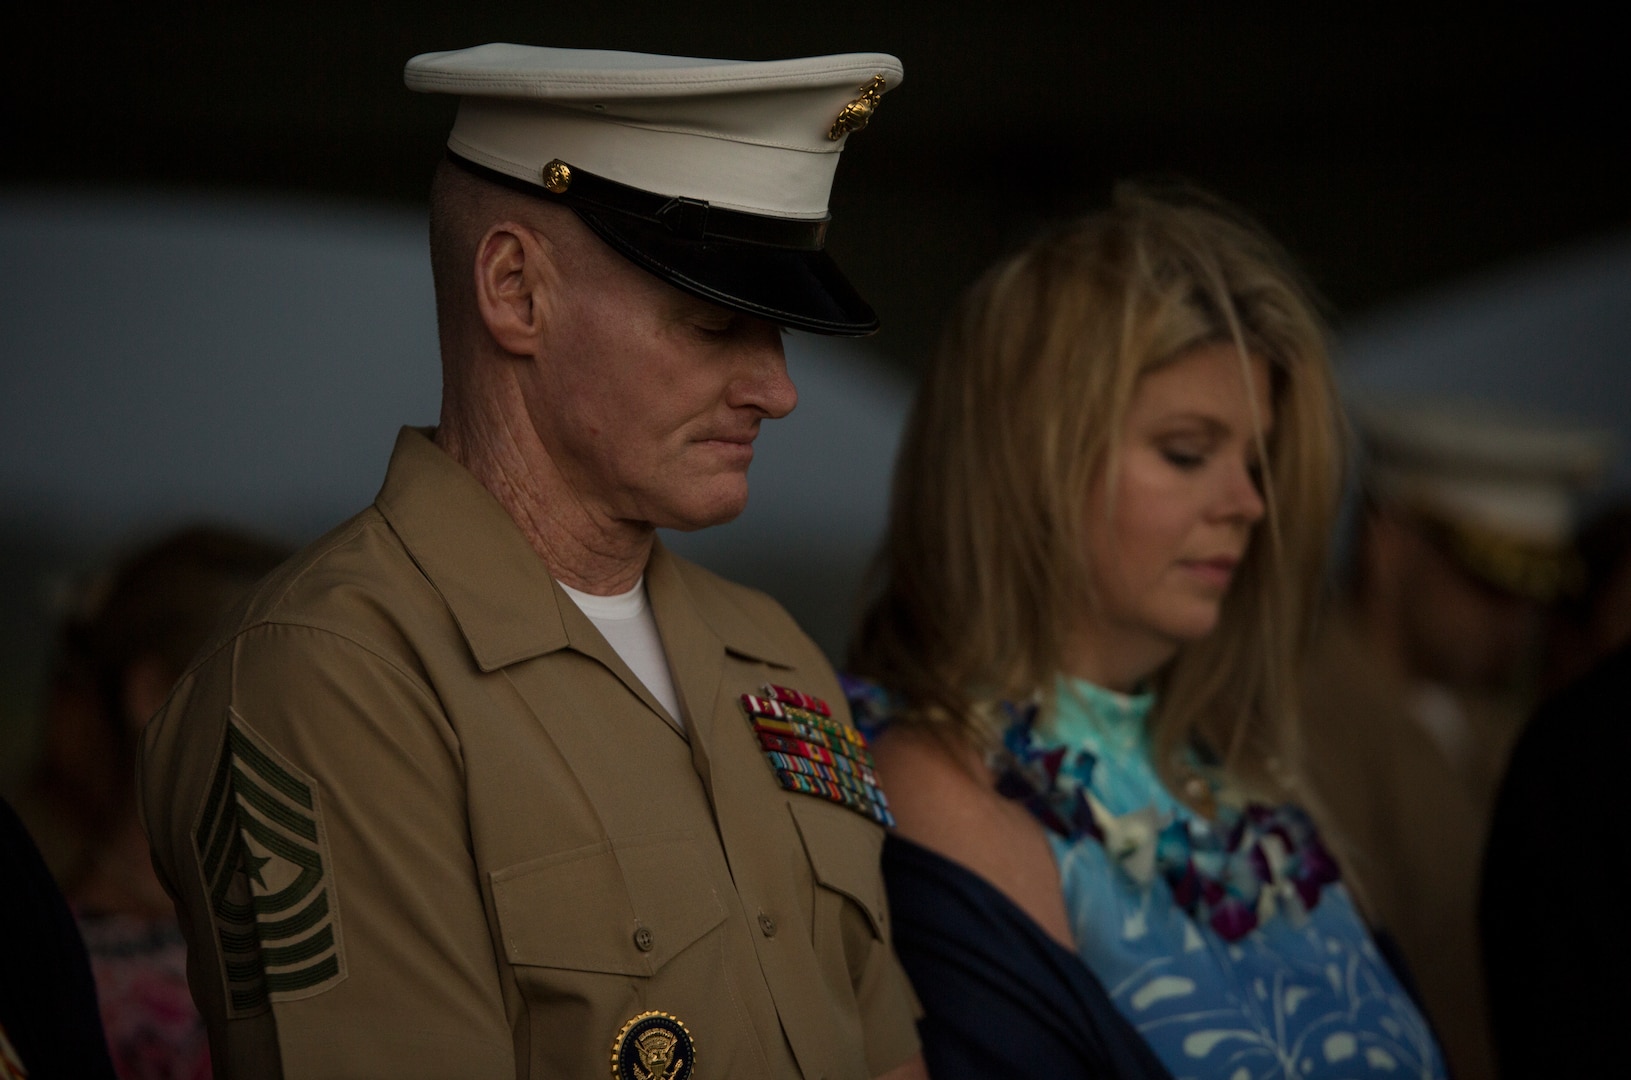 U.S. Marine Corps Sgt. Maj. Paul G. McKenna, outgoing sergeant major of U.S. Marine Corps Forces, Pacific, and his wife bow their heads during an invocation at a relief and appointment ceremony on Camp H.M. Smith, Hawaii, Feb. 9, 2018.